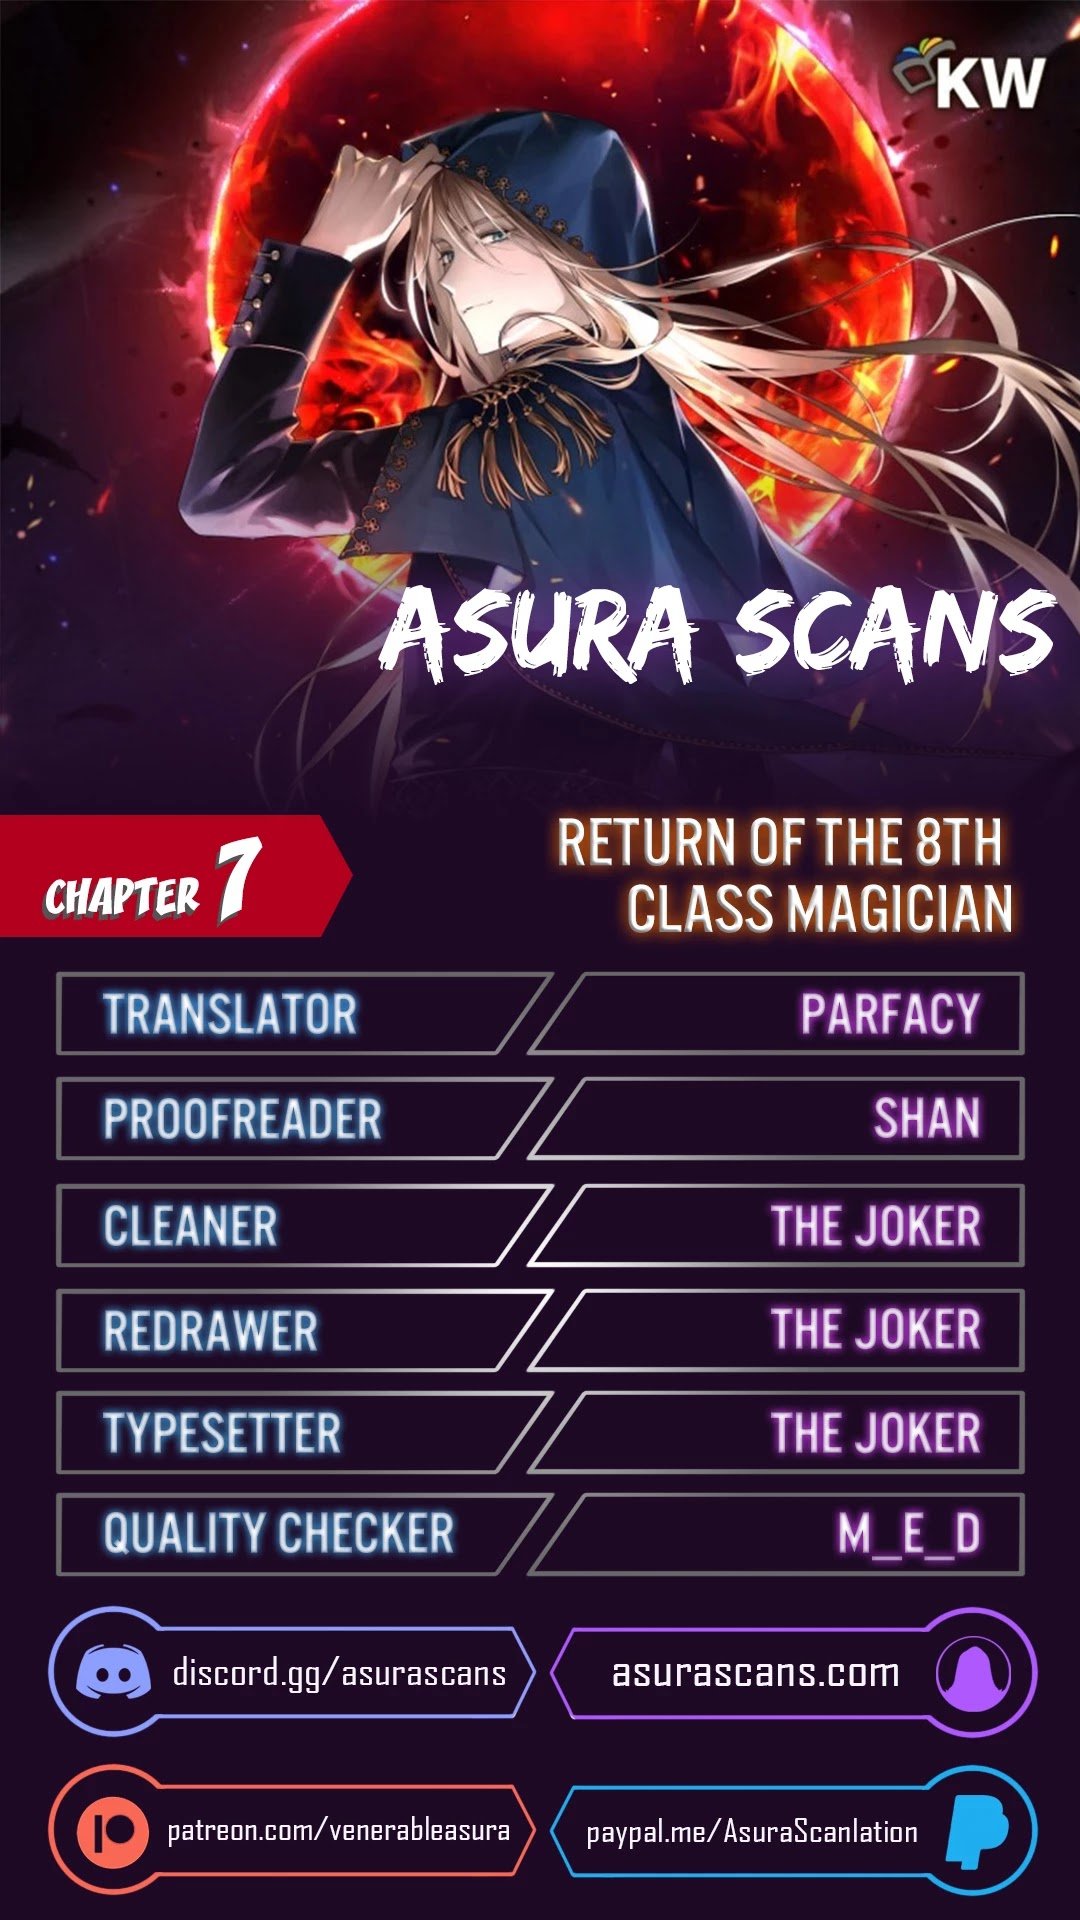 Return of the 8th class Magician chapter 7